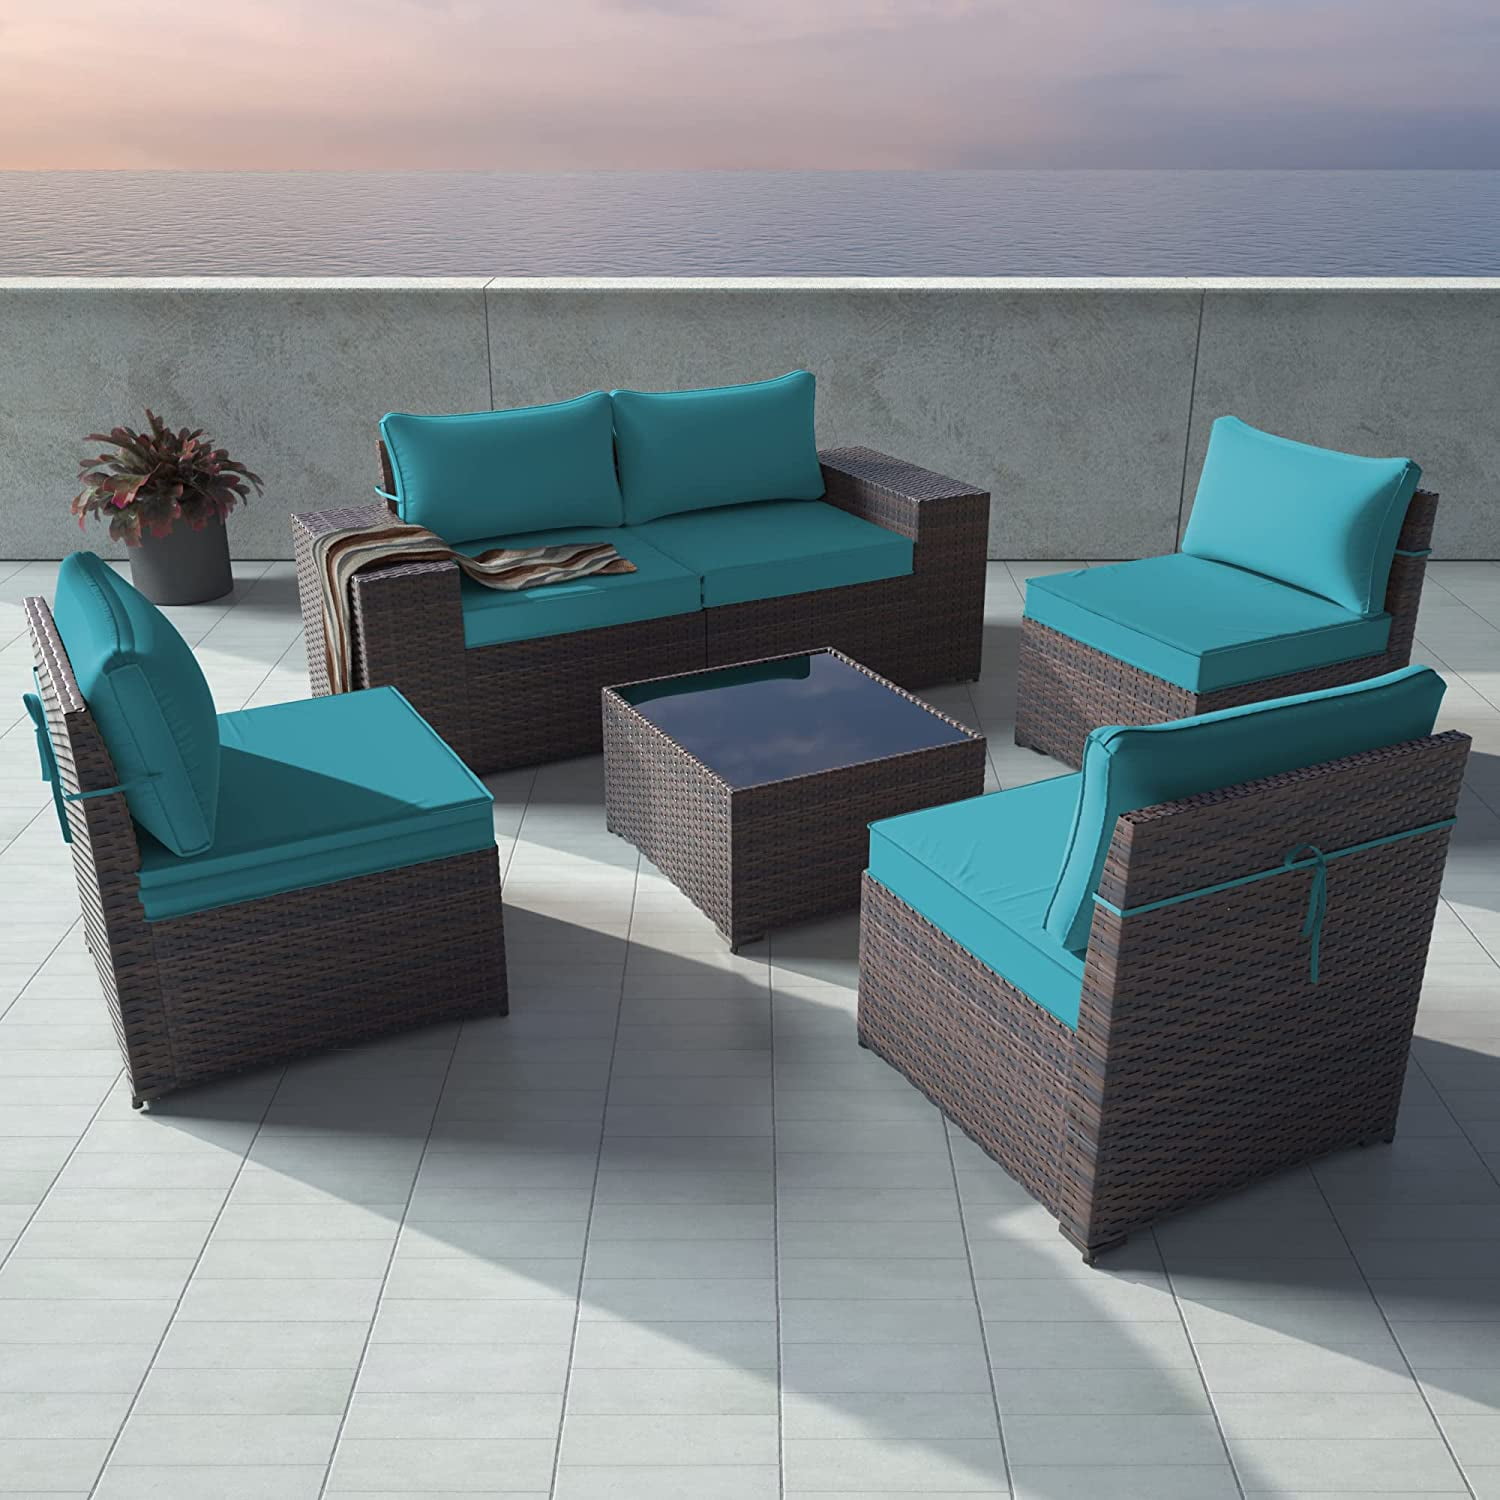 Alaulm Outdoor Furniture Sets 6 Piece Patio Sectional Furniture All